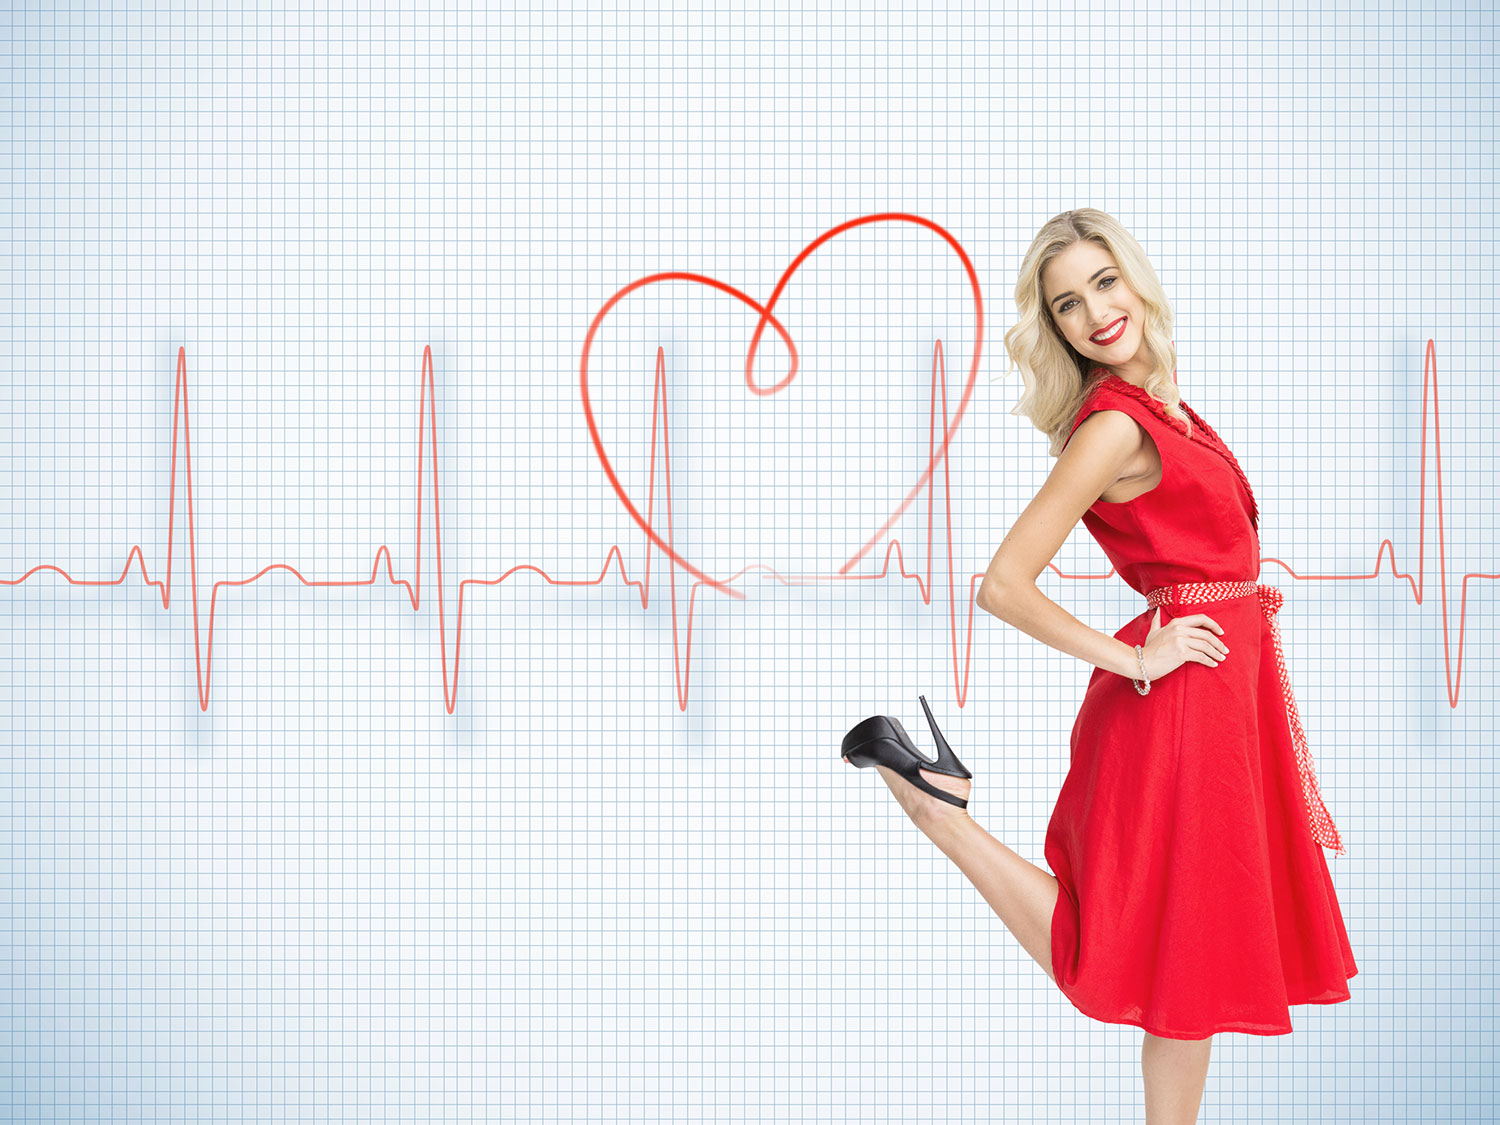 Easy methods for girls to aid their heart health